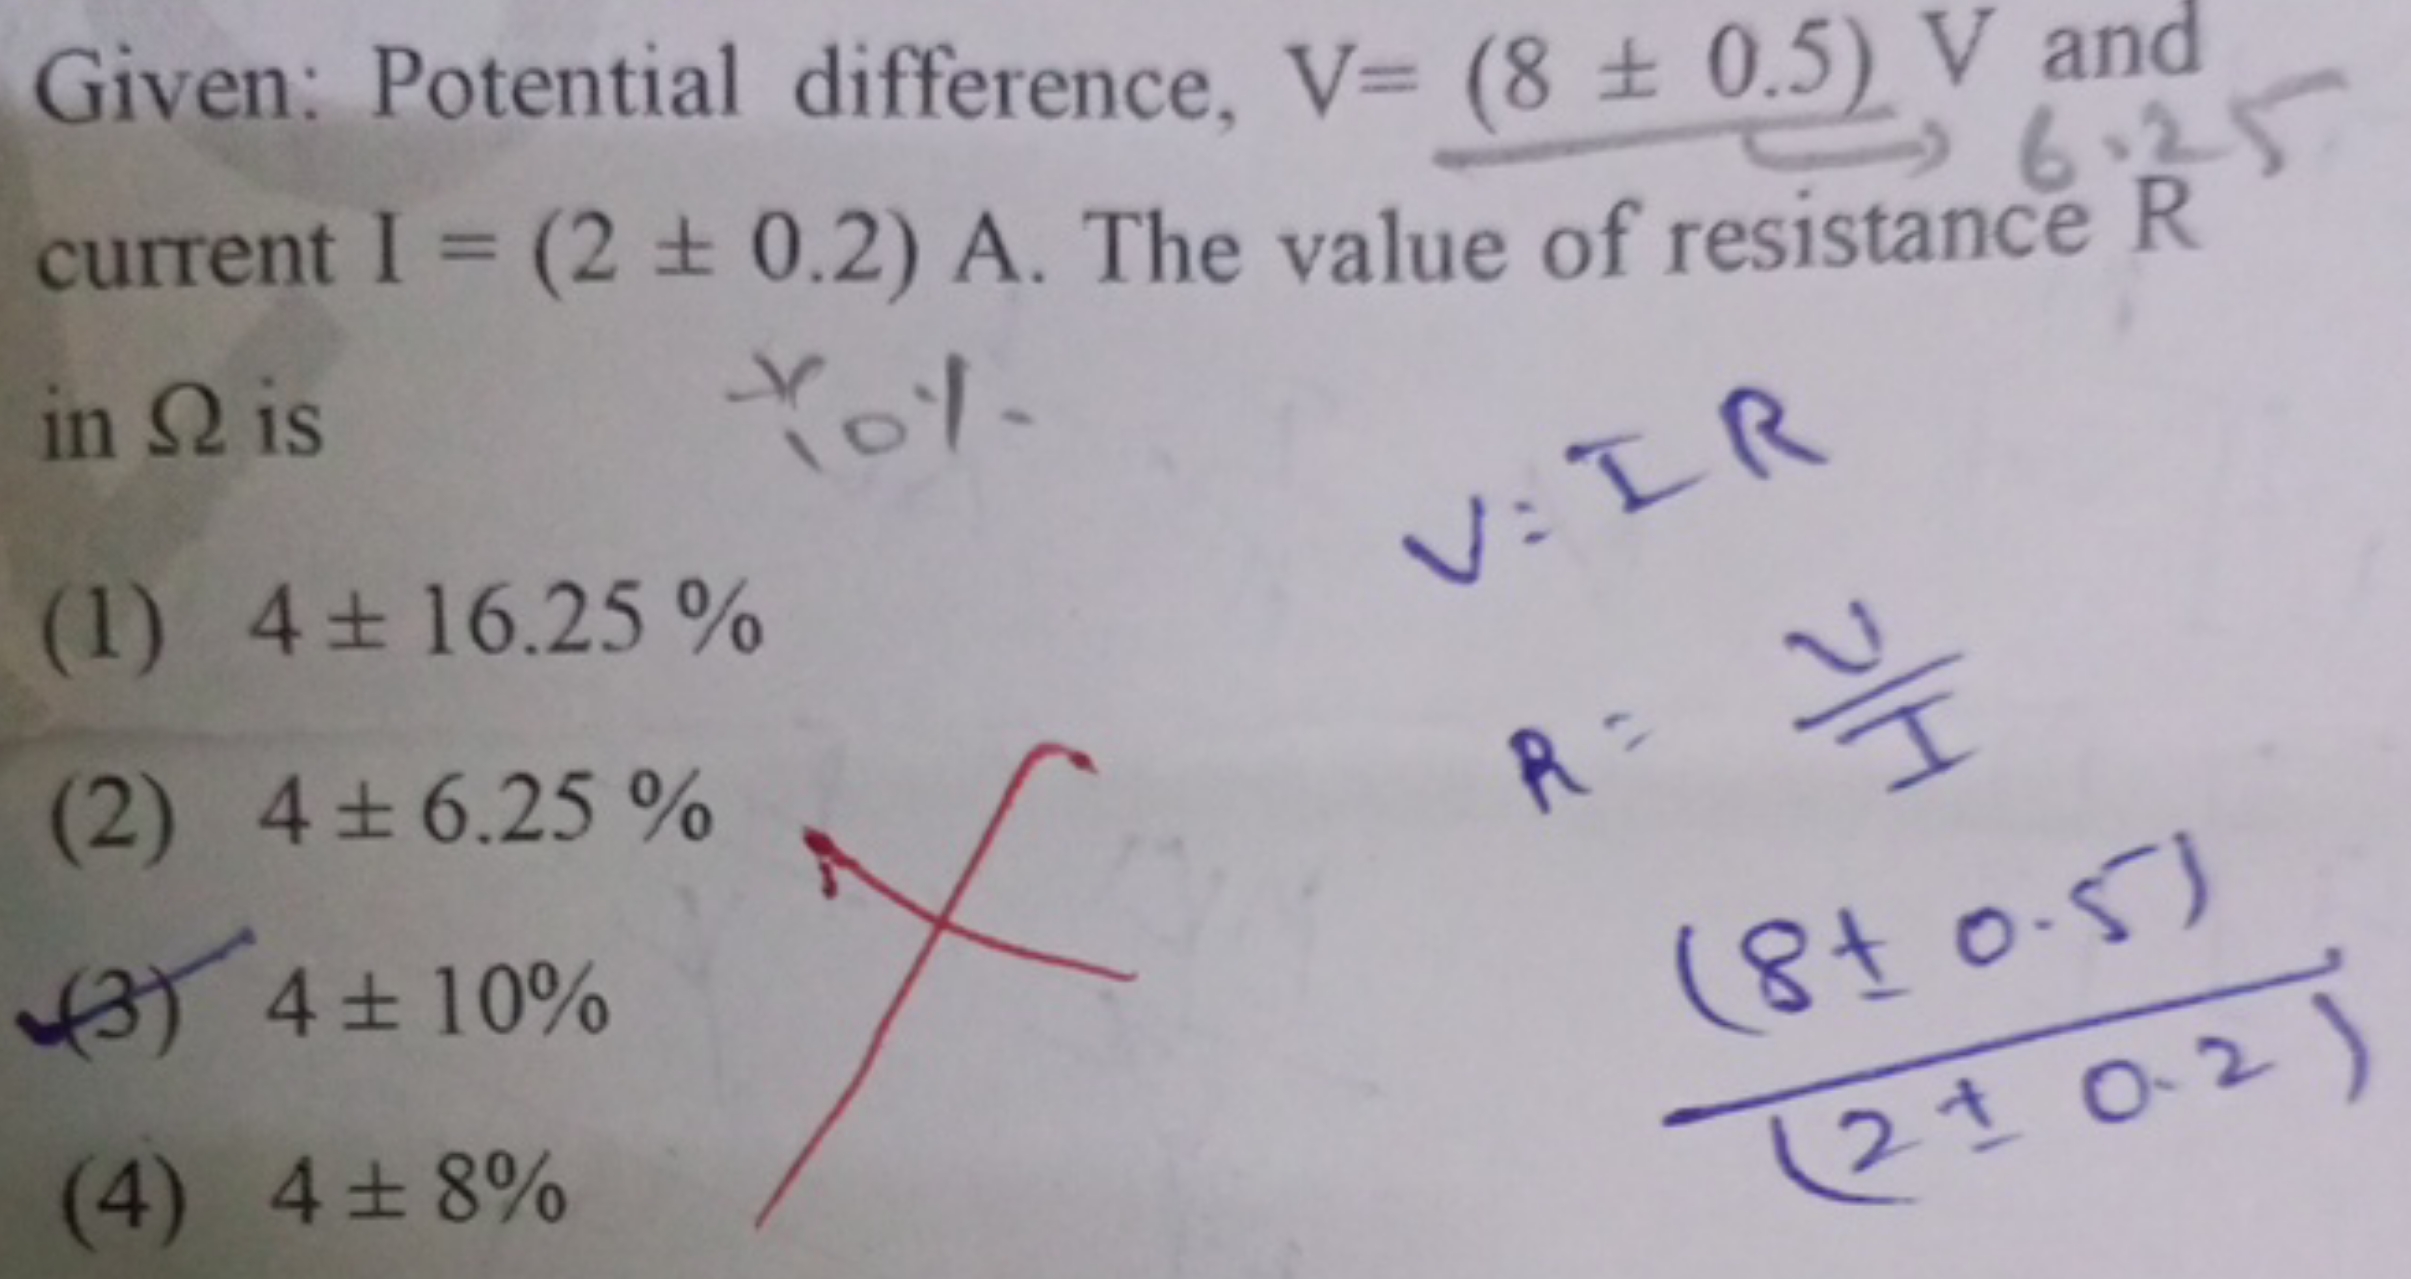 Given: Potential difference, V=(8±0.5)V and current I=(2±0.2)A. The va